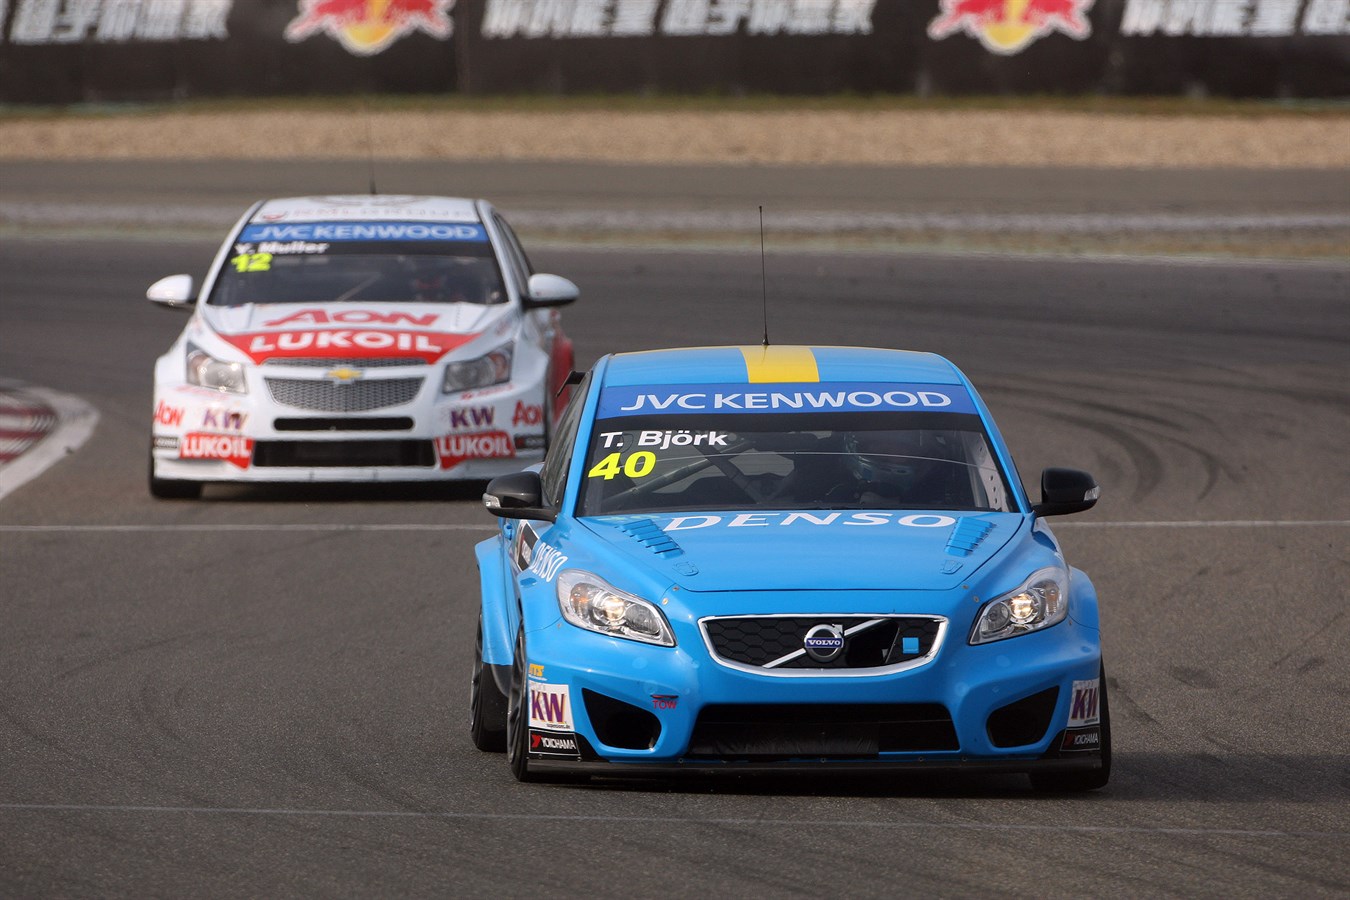 Tough but competitive WTCC weekend for Volvo Polestar Racing in China